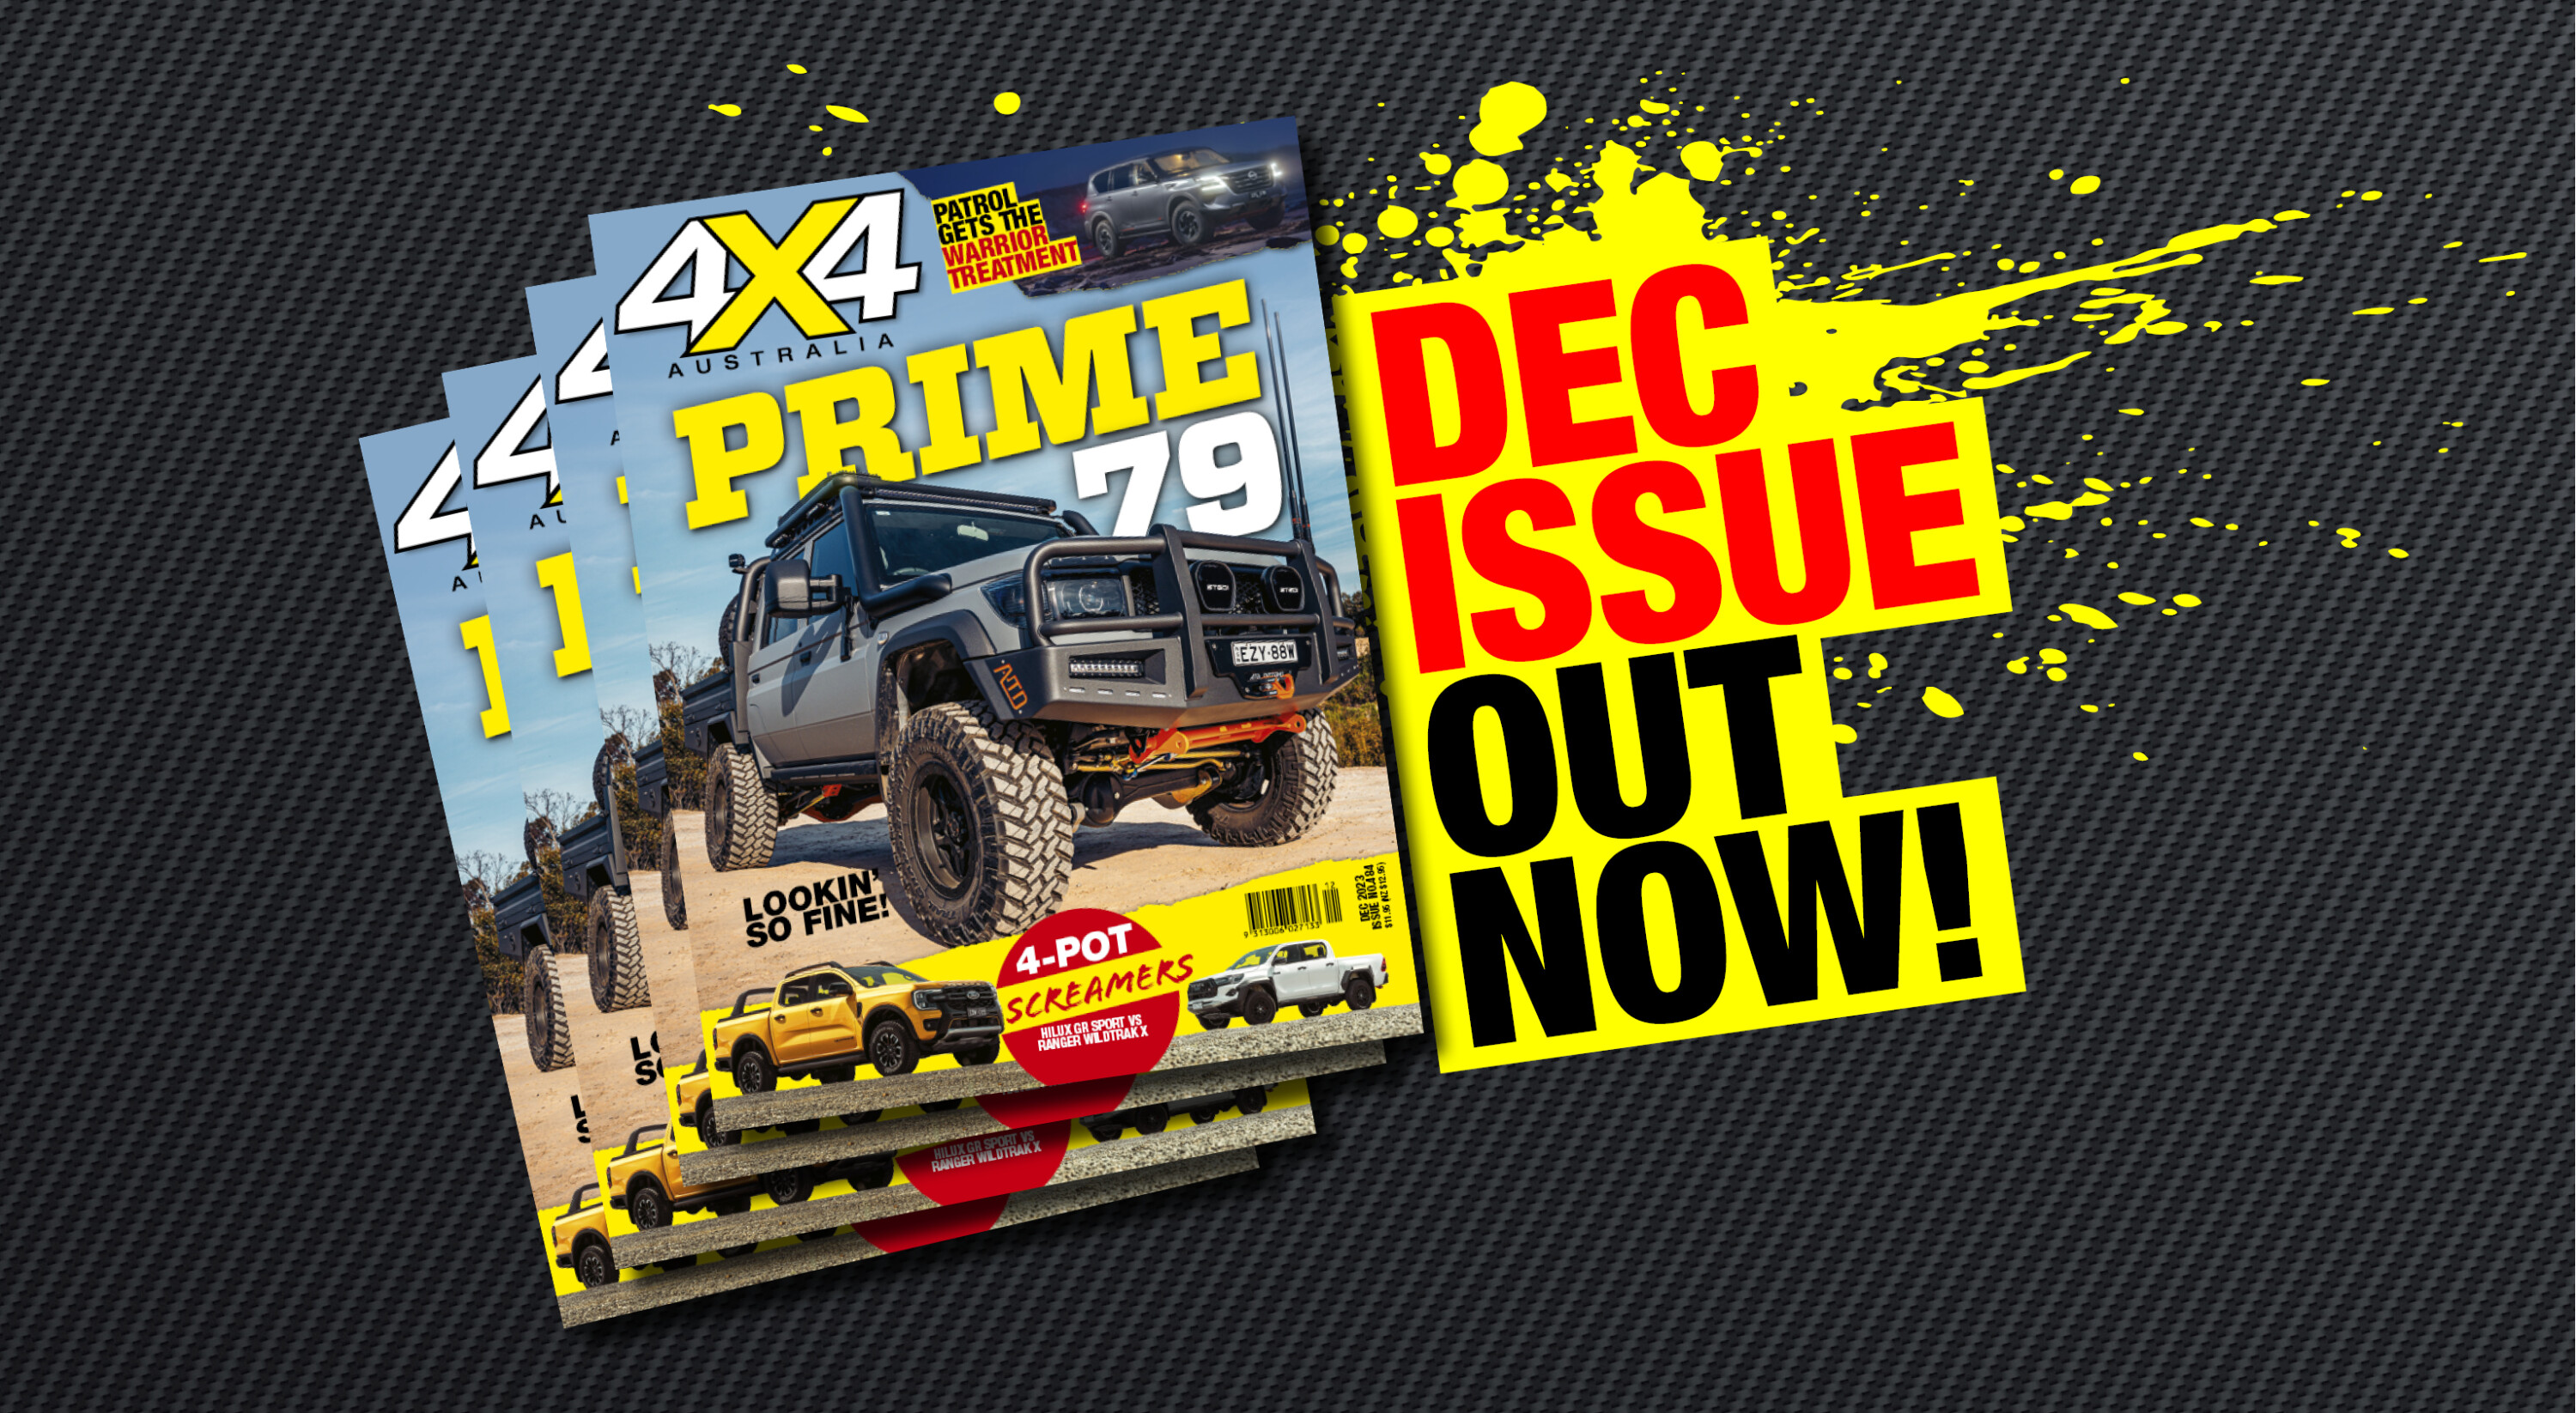 0d6111e5/december 2023 issue out now jpg